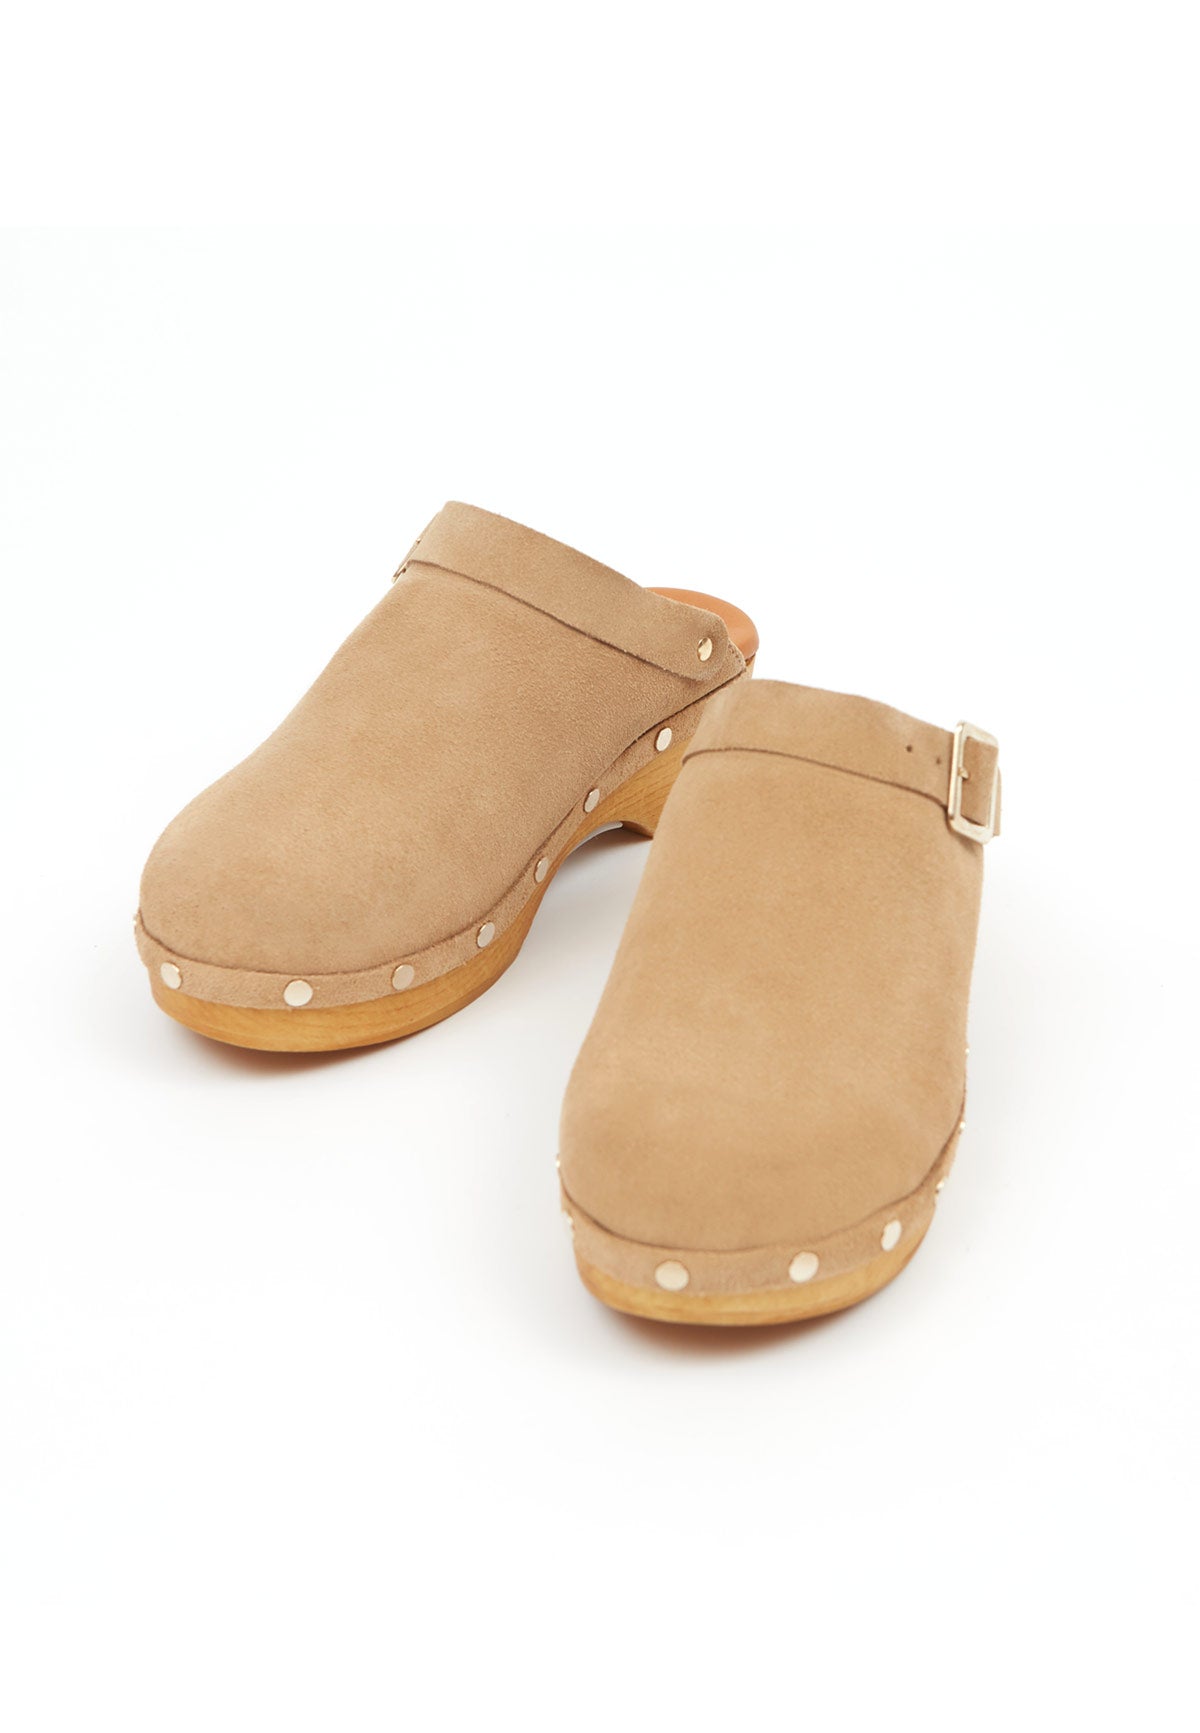 LEATHER CLOGS - Moeon